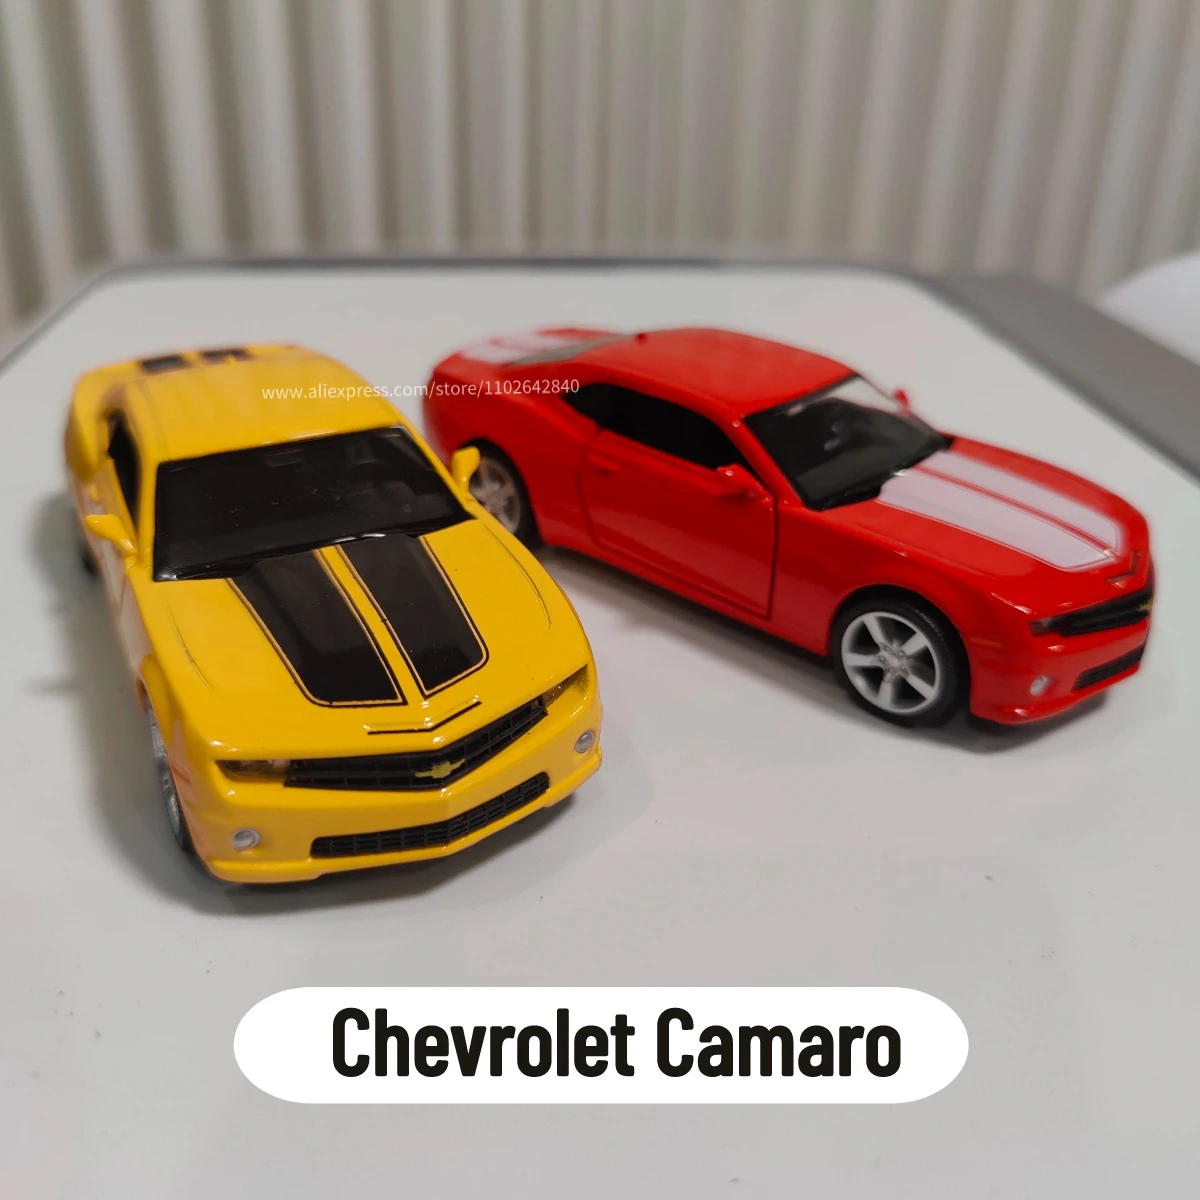 

Scale 1:36 Chevrolet Camaro Diecast Muscle Car Model Replica Collectible Miniature for Home Office Educational Toys Boys